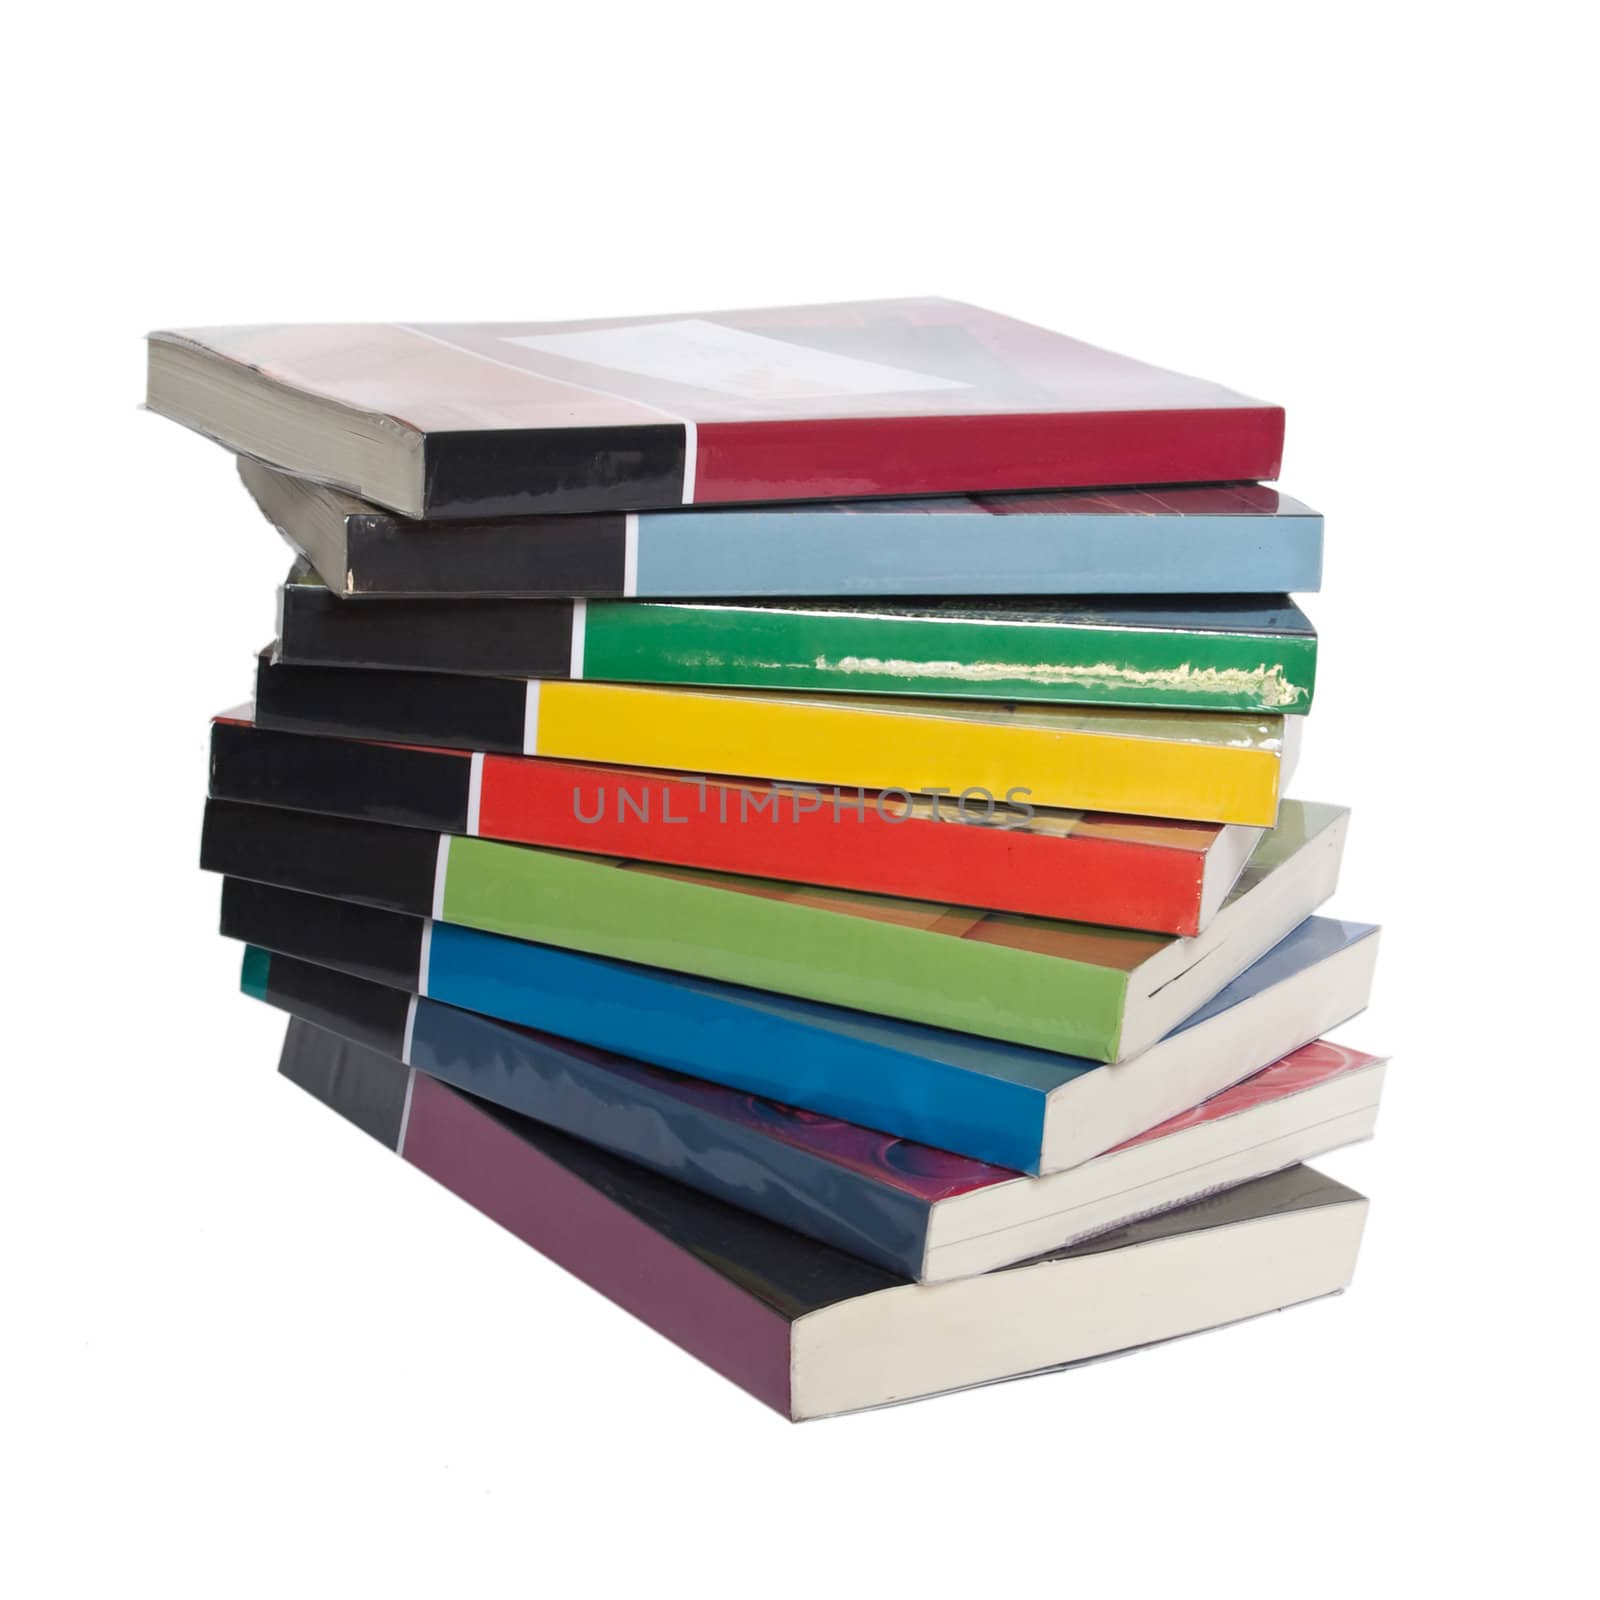 Twisted stack of colorful real books by Exsodus